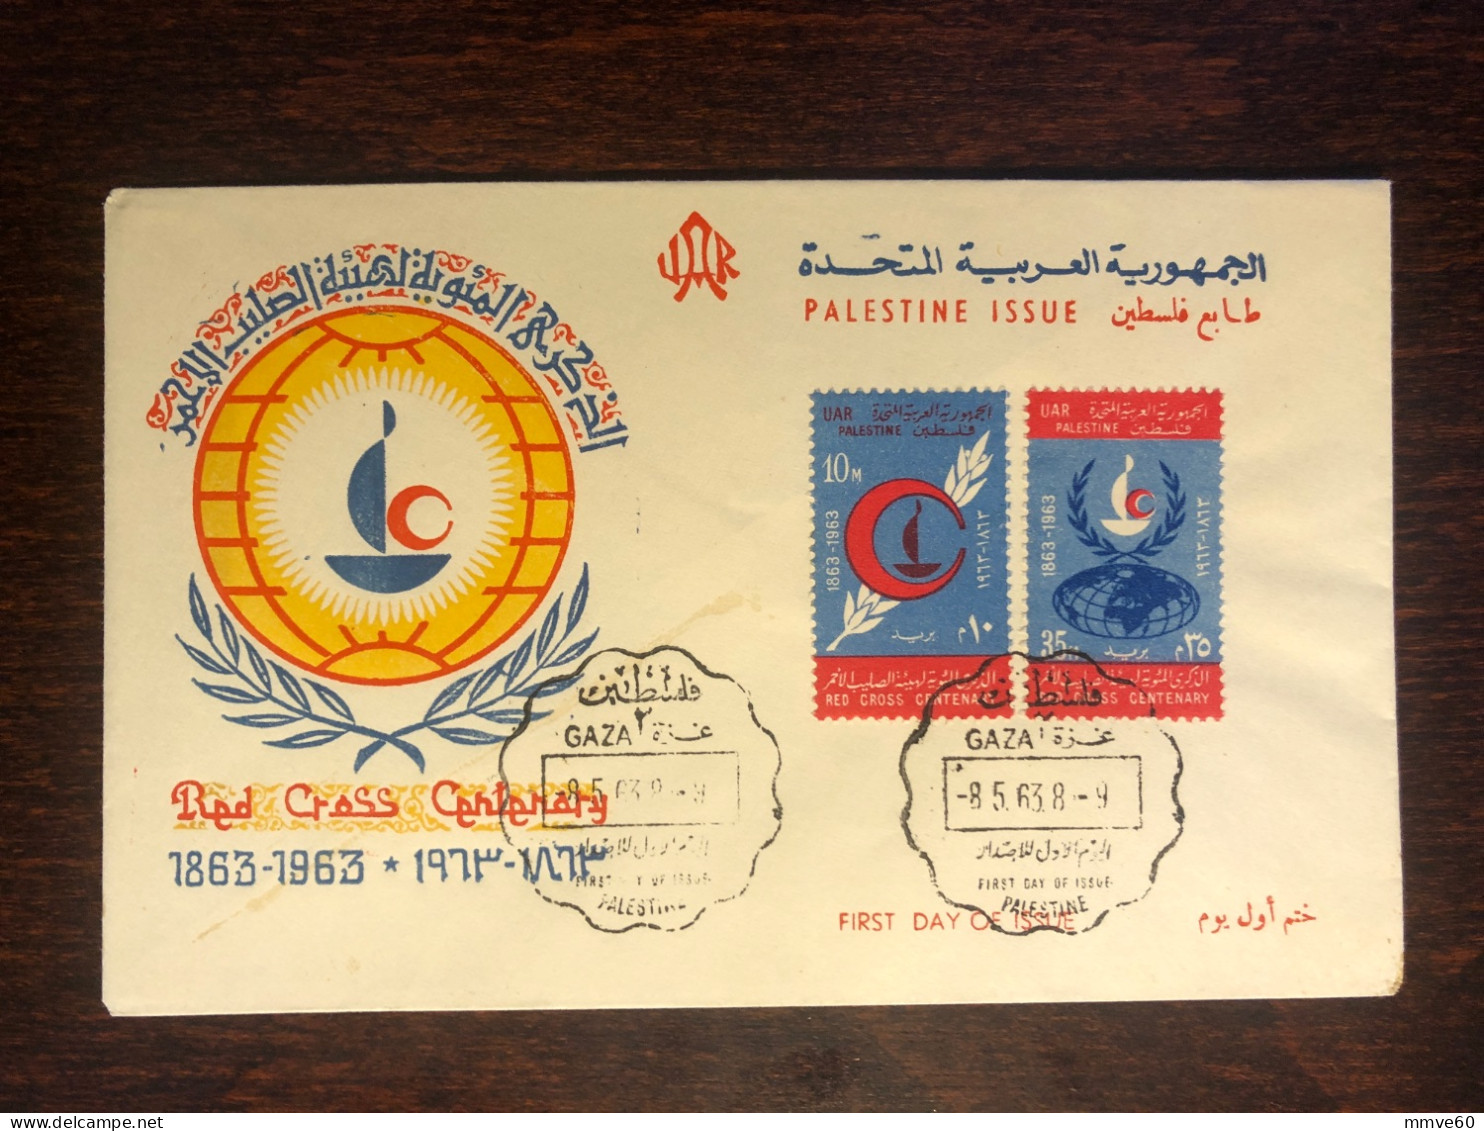 EGYPT UAR PALESTINE GAZA FDC COVER 1963 YEAR  RED CROSS HEALTH MEDICINE STAMPS - Covers & Documents